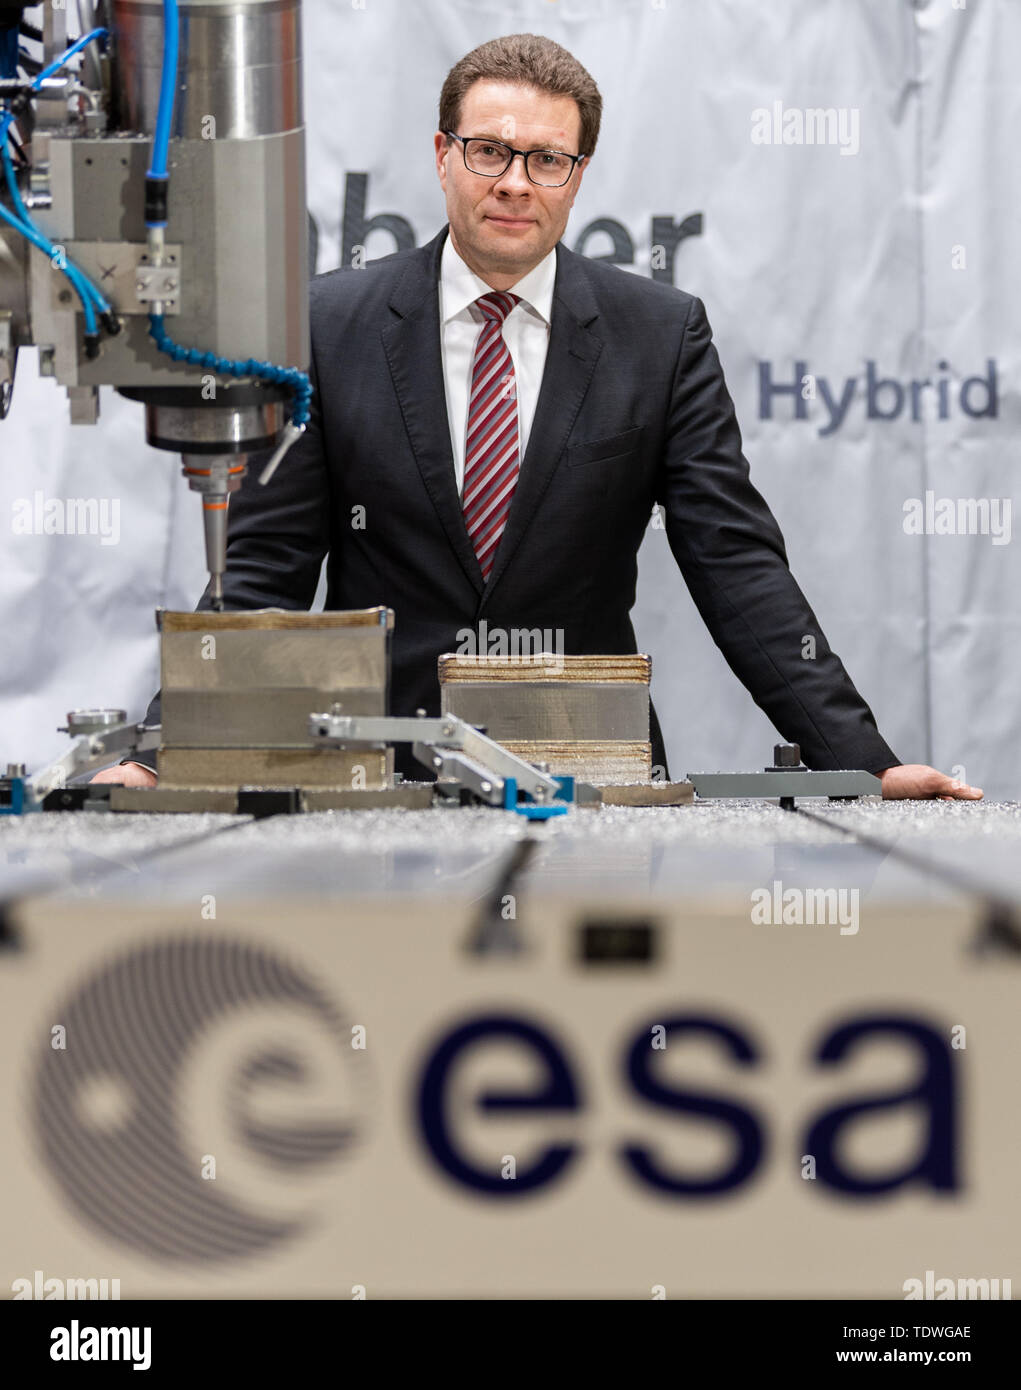 Dresden, Germany. 03rd Apr, 2019. Christoph Leyens, director of the Fraunhofer IWS Dresden, is located in the Additive Manufacturing Center Dresden (AMCD). Credit: Robert Michael/dpa-Zentralbild/ZB/dpa/Alamy Live News Stock Photo